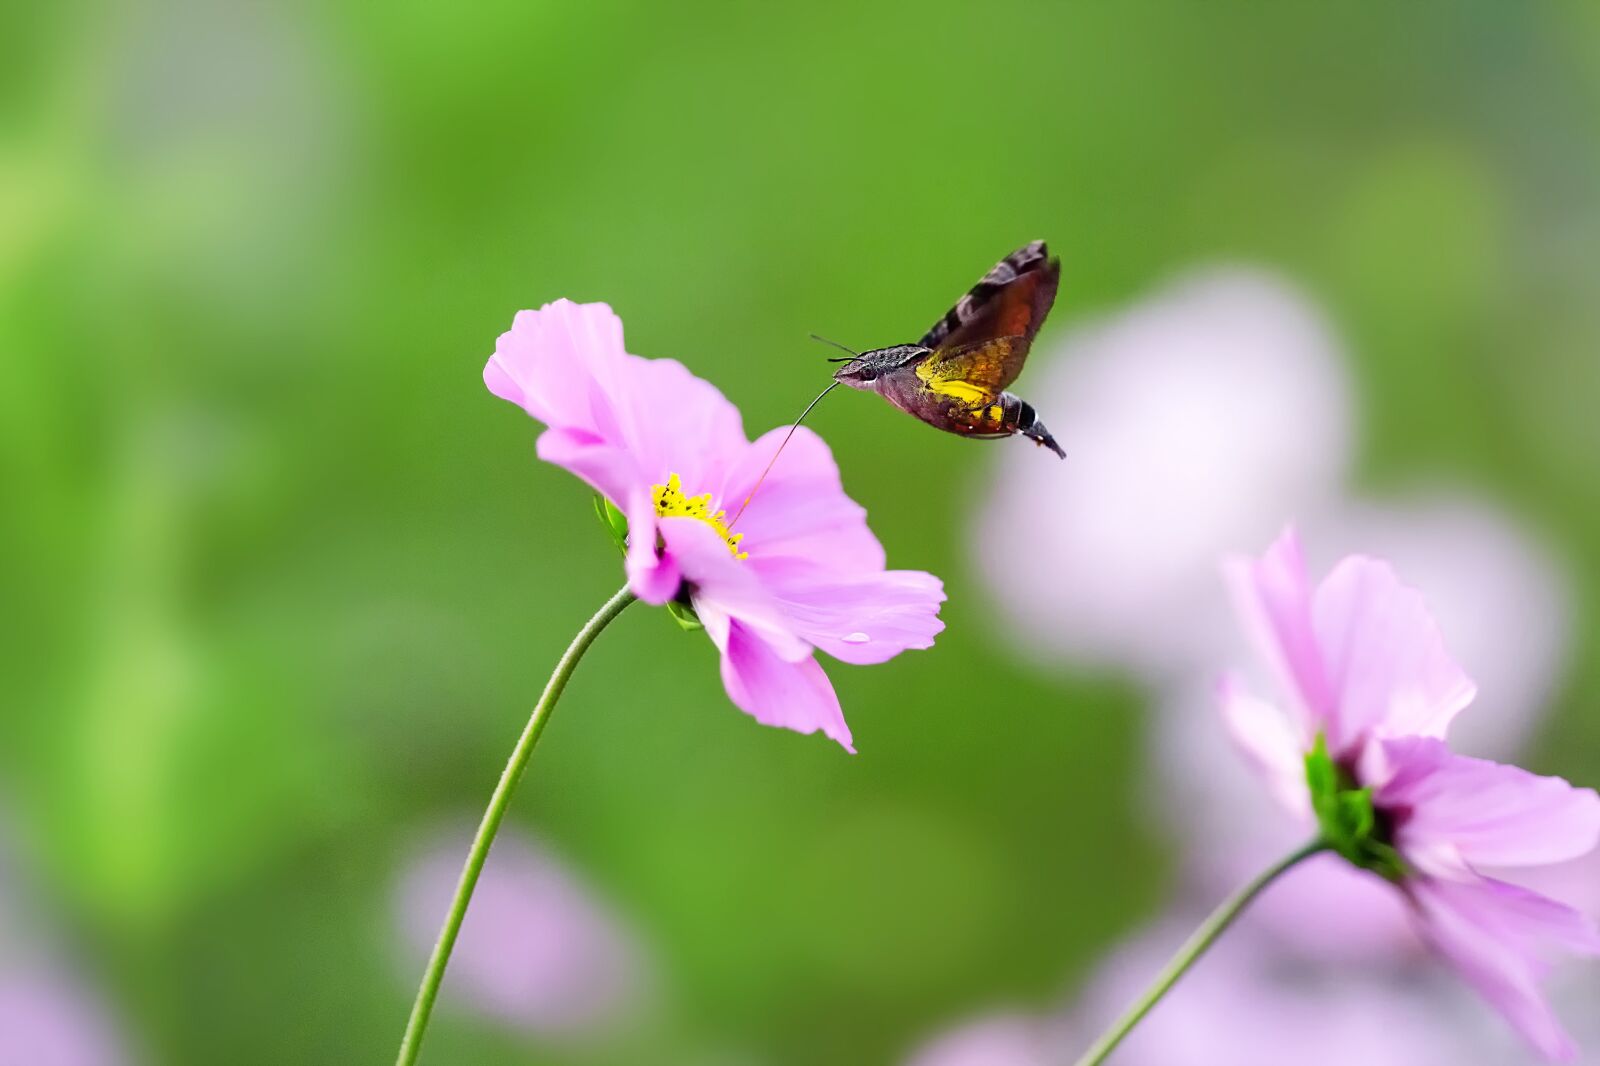 Sony a7R IV sample photo. Natural, insect, houjaku photography